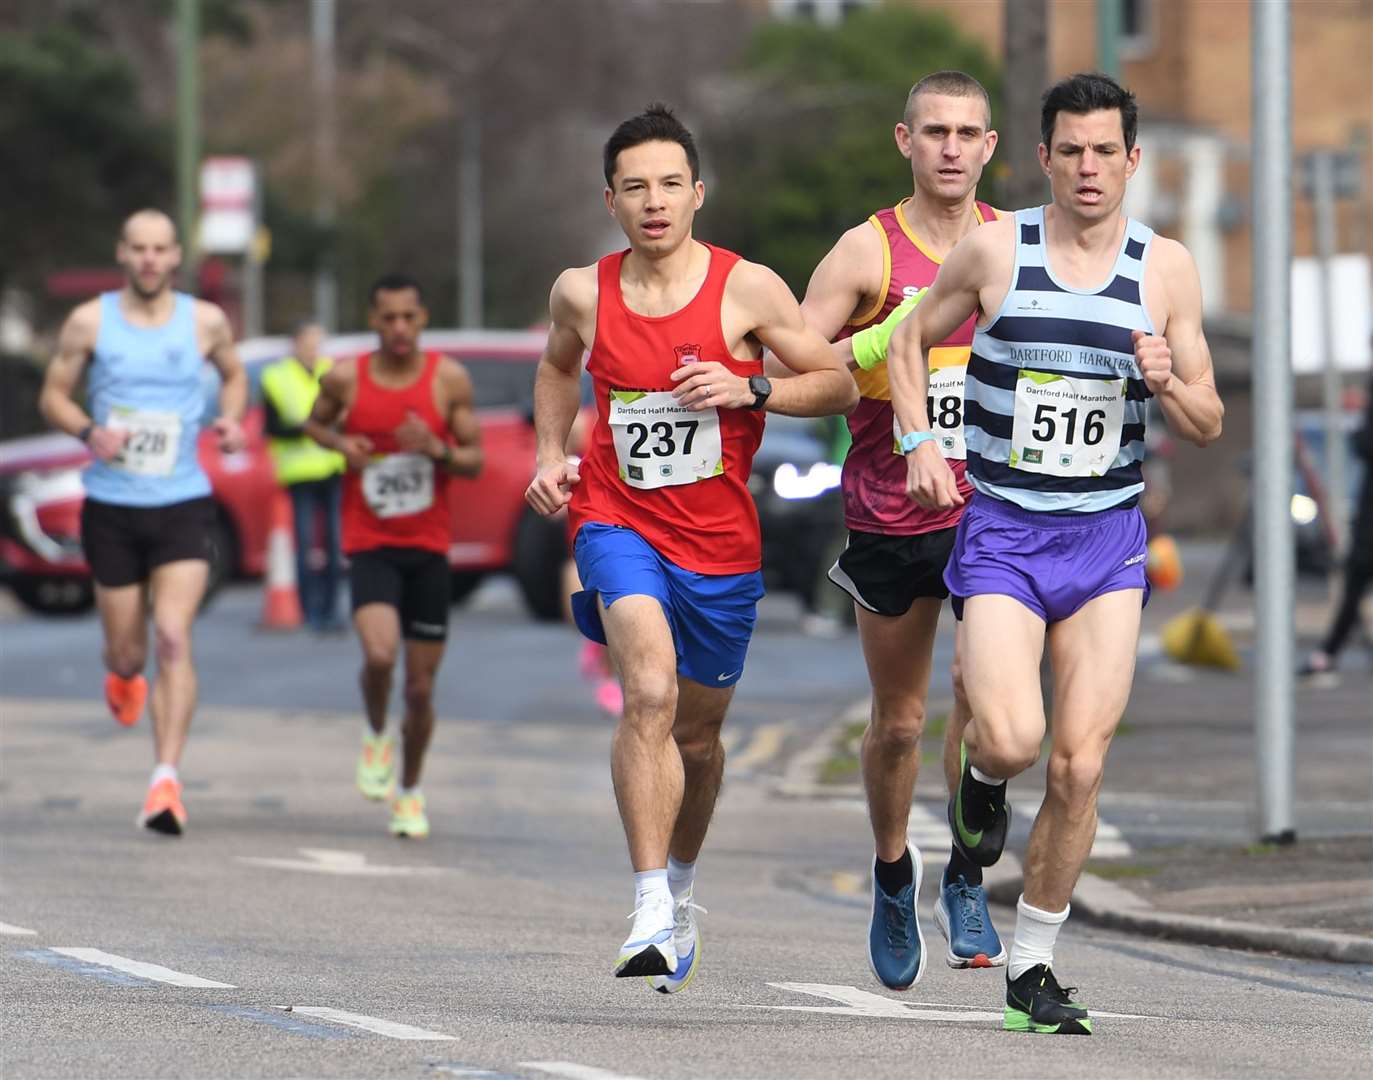 Joshua Teece (No.237) battles Sam Coombes (No.516) for victory at the Dartford Half-Marathon. Picture: Barry Goodwin (55423206)